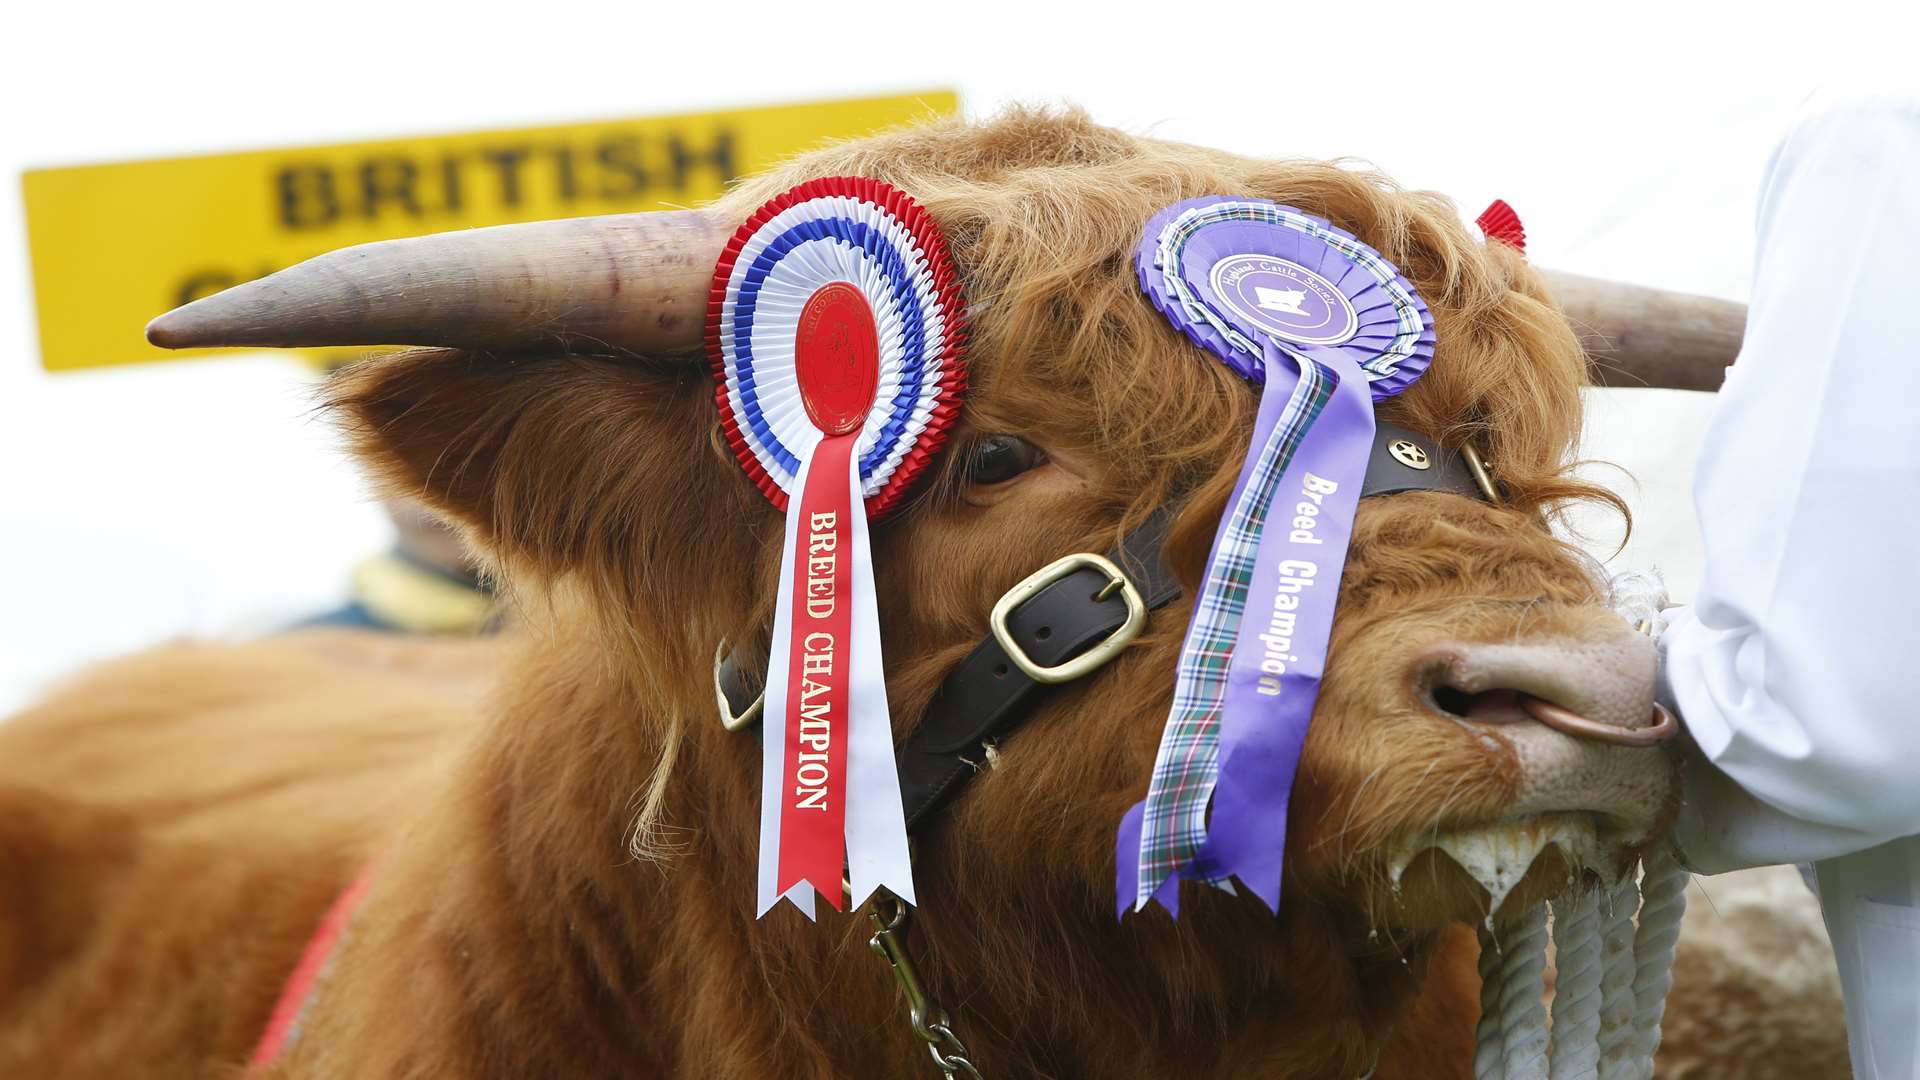 The Kent County Show celebrates agricultural and farming heritage